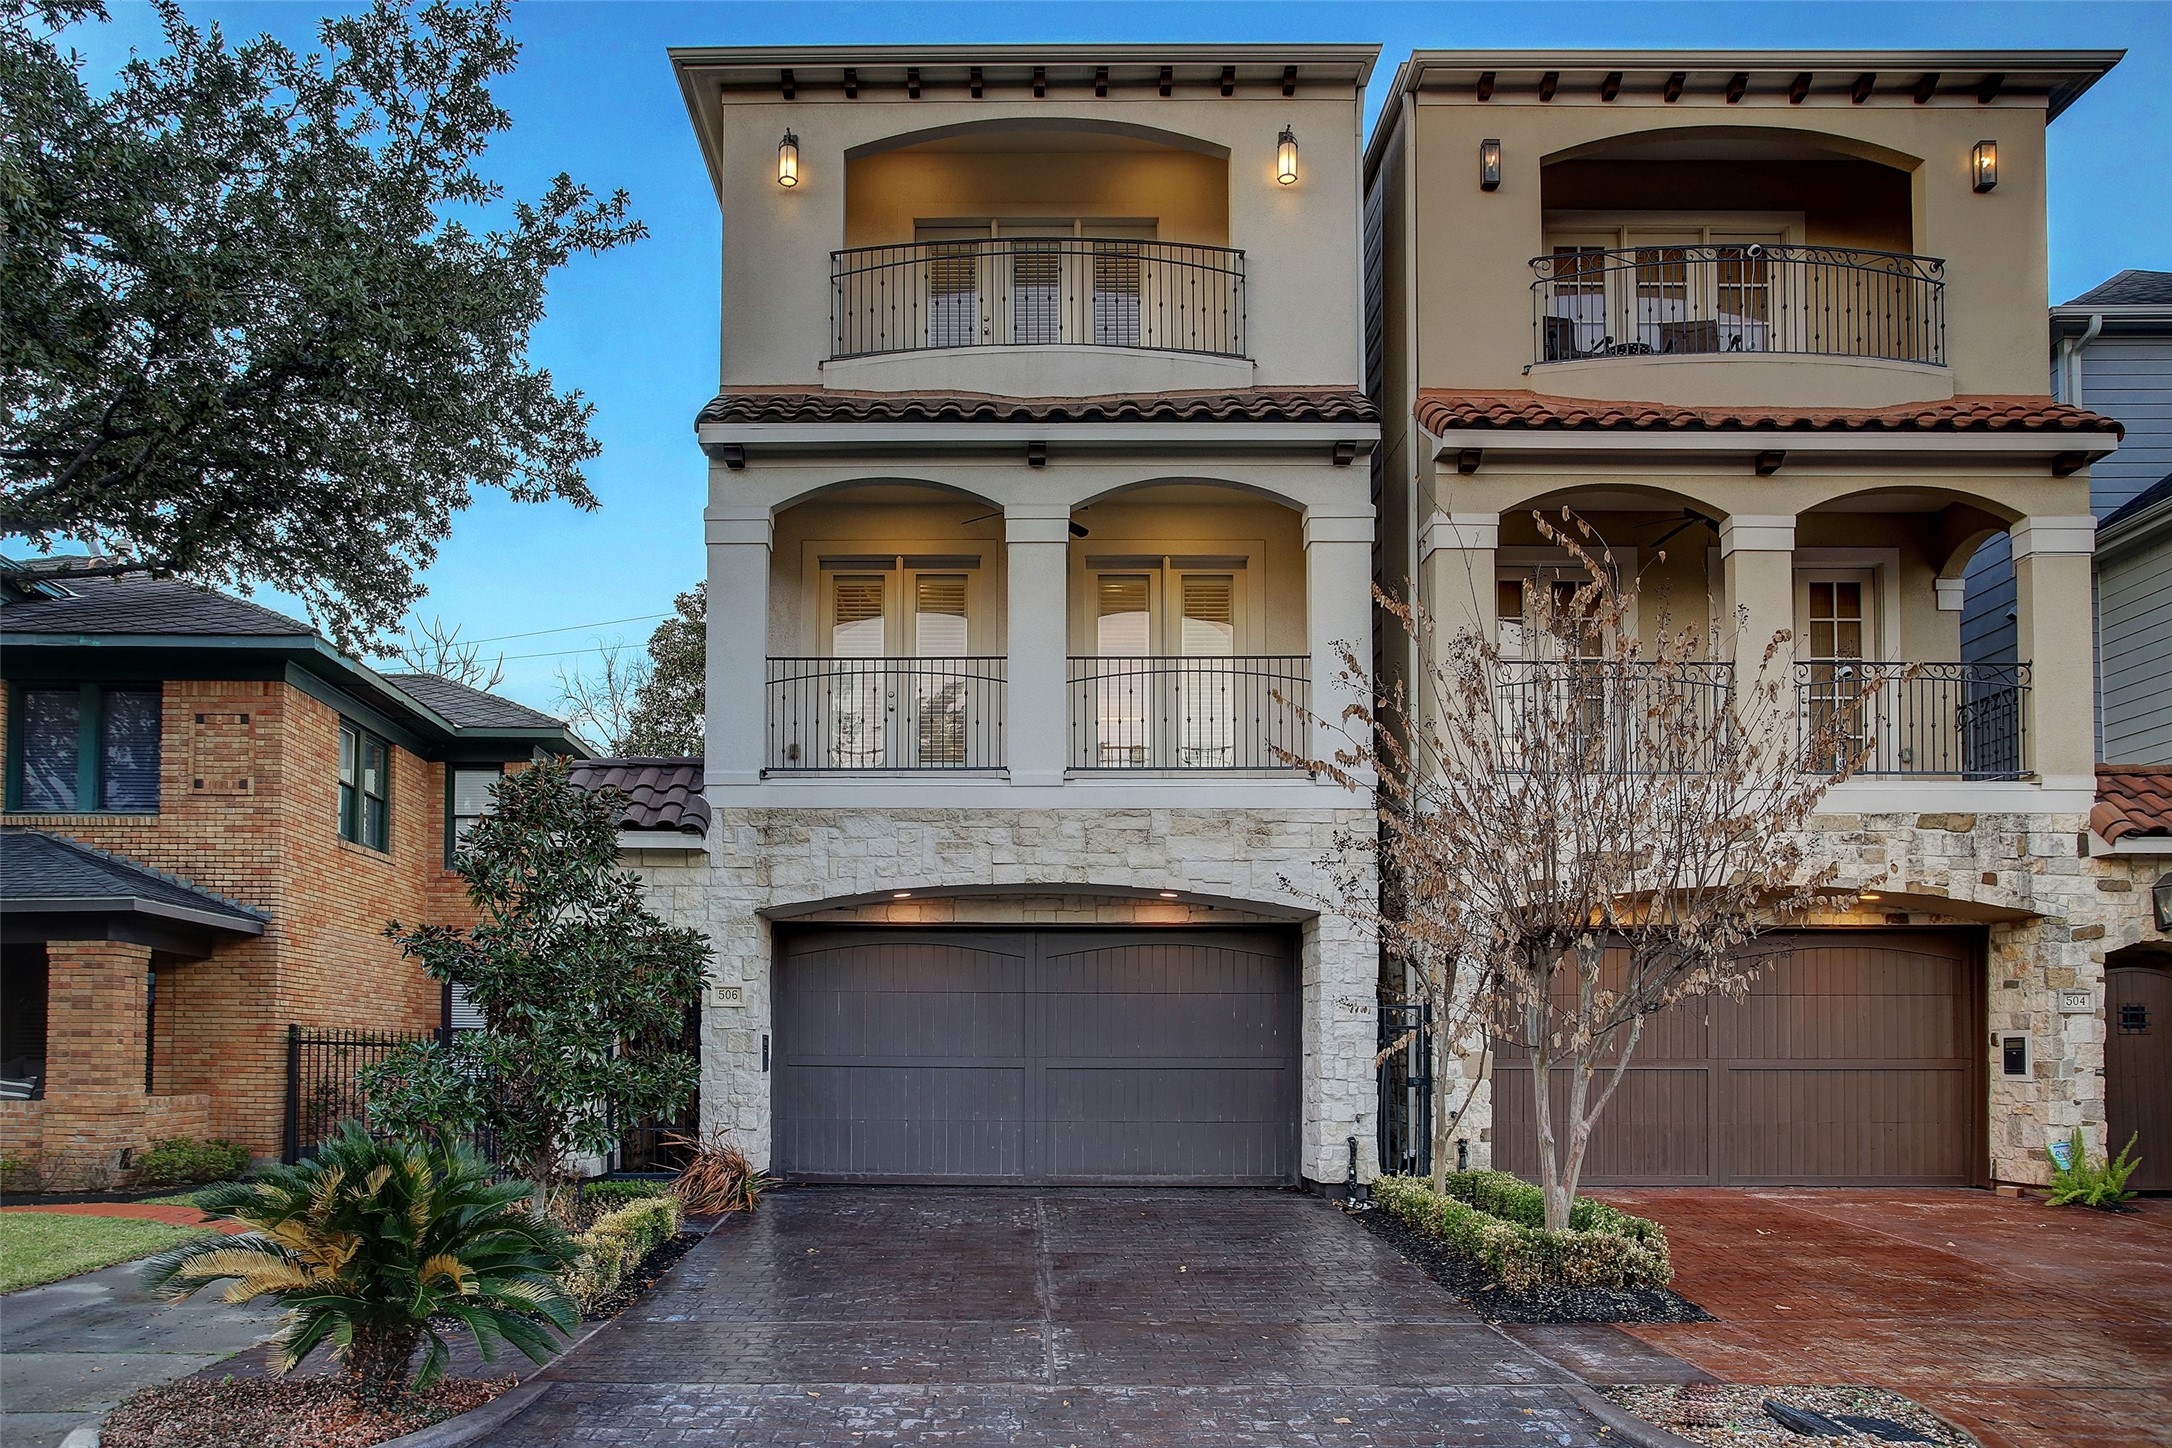 Welcome home to 506 W. Pierce Street! Distinguished CitiView home with all the bells and whistles. Ideal FIRST FLOOR LIVING plan with rich HARDWOODS, PRIVATE yard & BALCONY on every level.